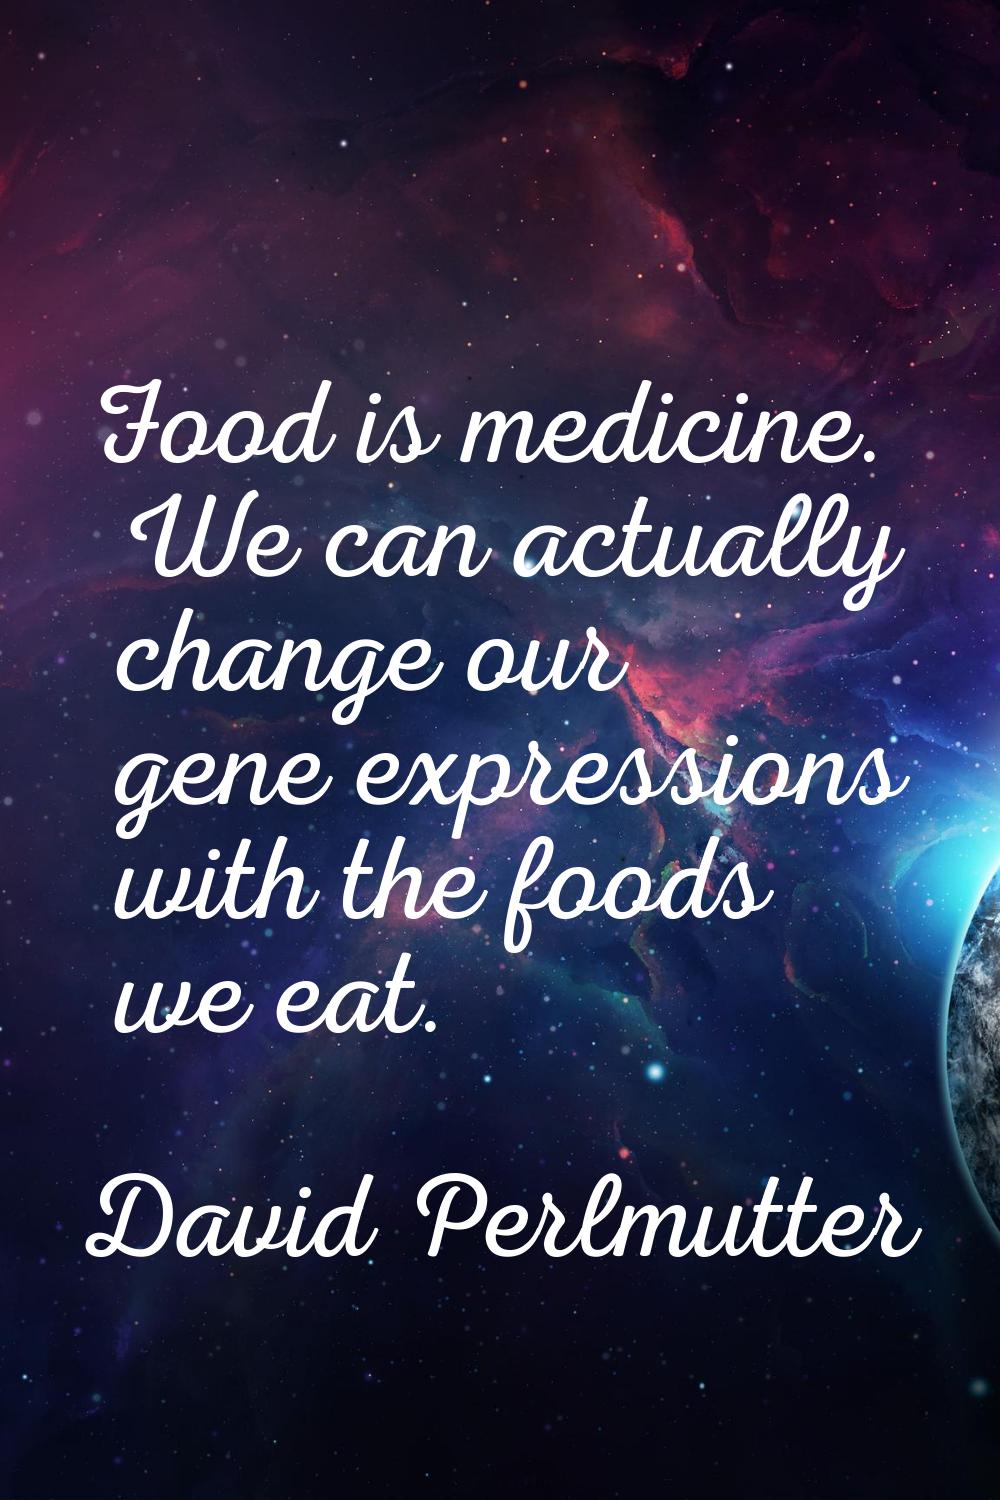 Food is medicine. We can actually change our gene expressions with the foods we eat.